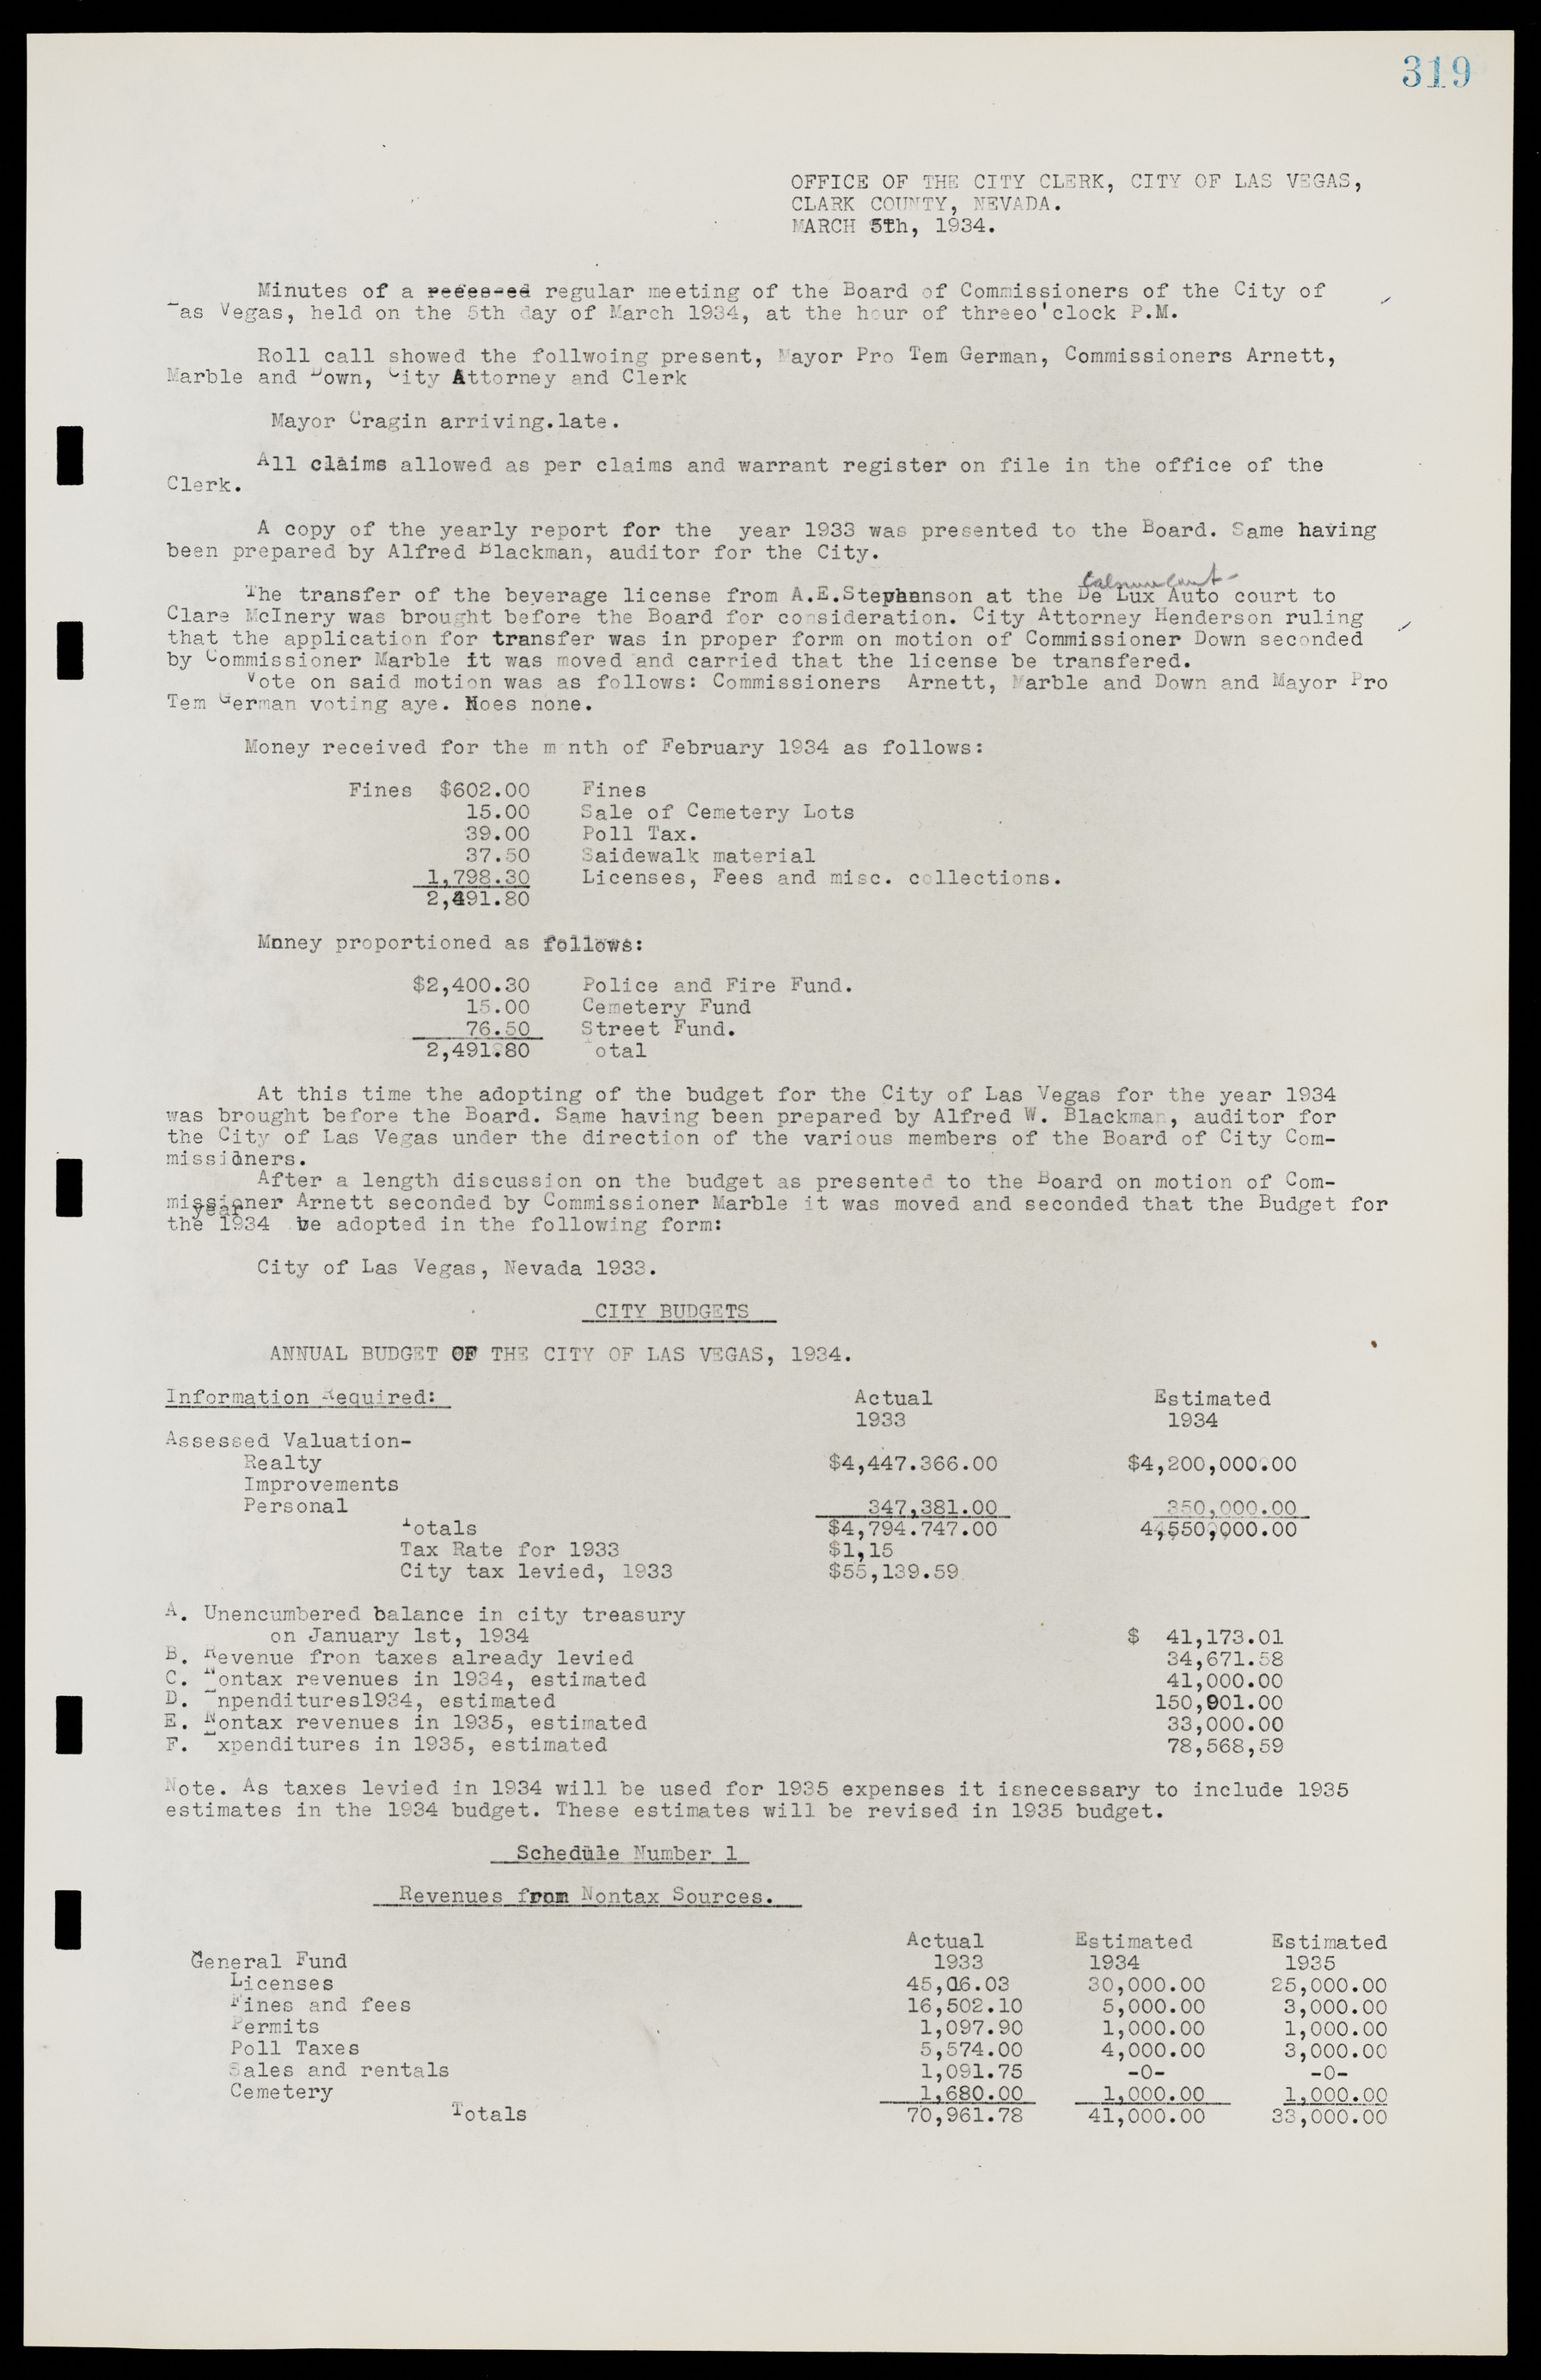 Las Vegas City Commission Minutes, May 14, 1929 to February 11, 1937, lvc000003-326